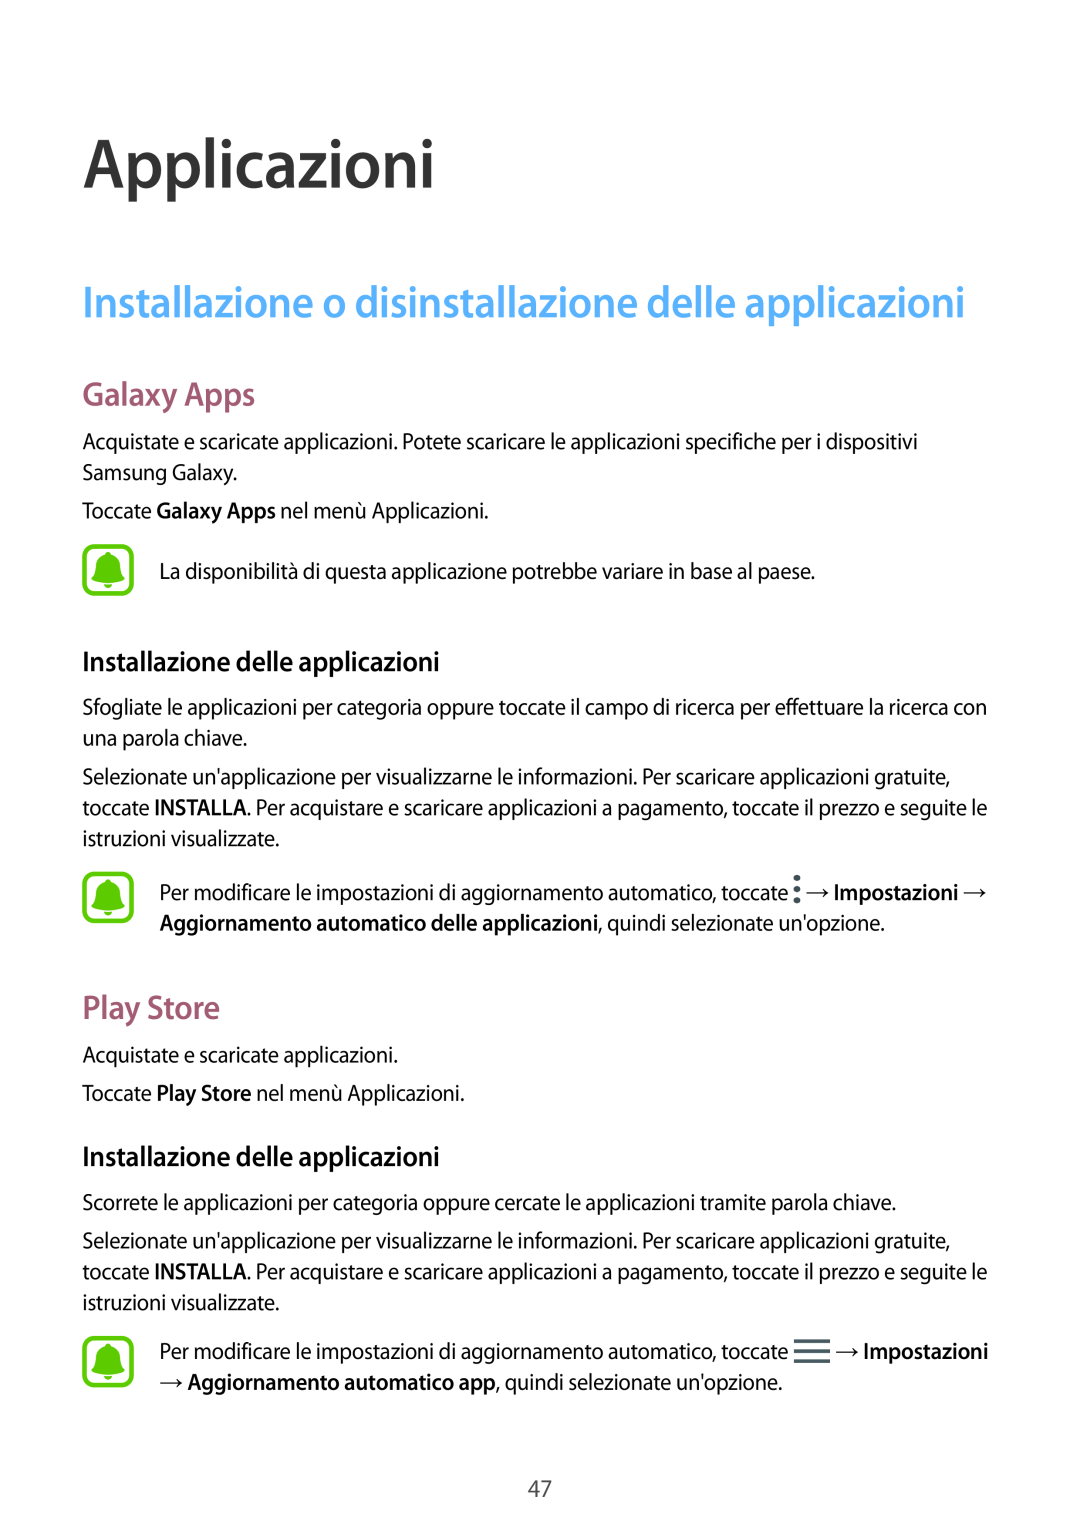 Samsung SM-T810NZKEAUT manual Applicazioni, Installazione o disinstallazione delle applicazioni, Galaxy Apps, Play Store 